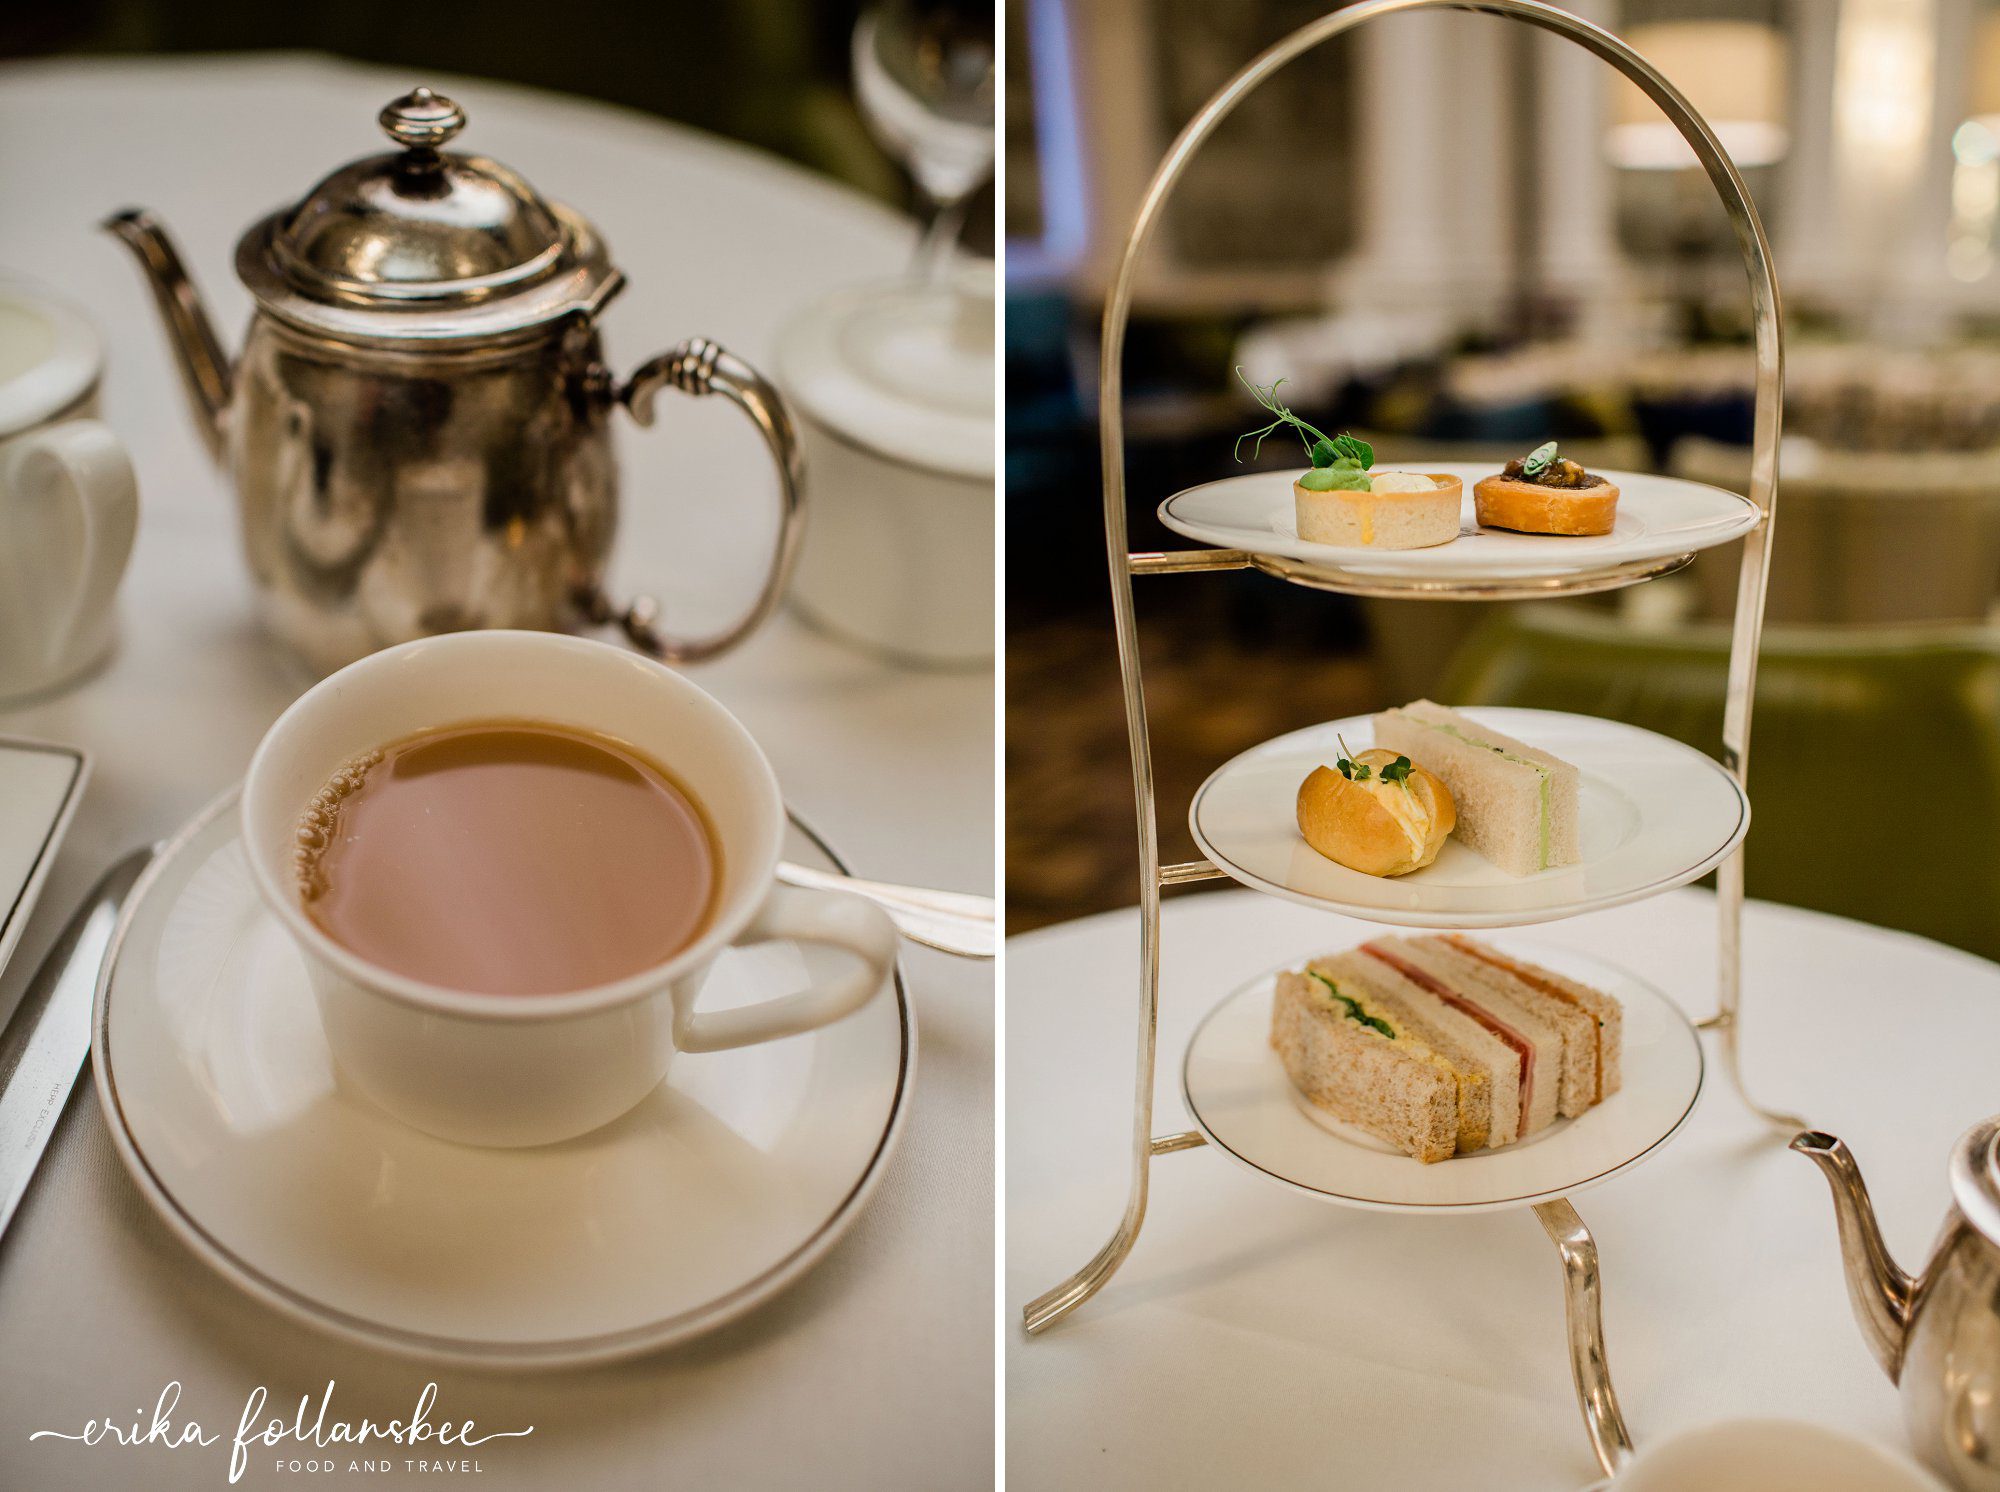 Afternoon tea at the Balmoral Hotel, Palm Court, in Edinburgh, Scotland